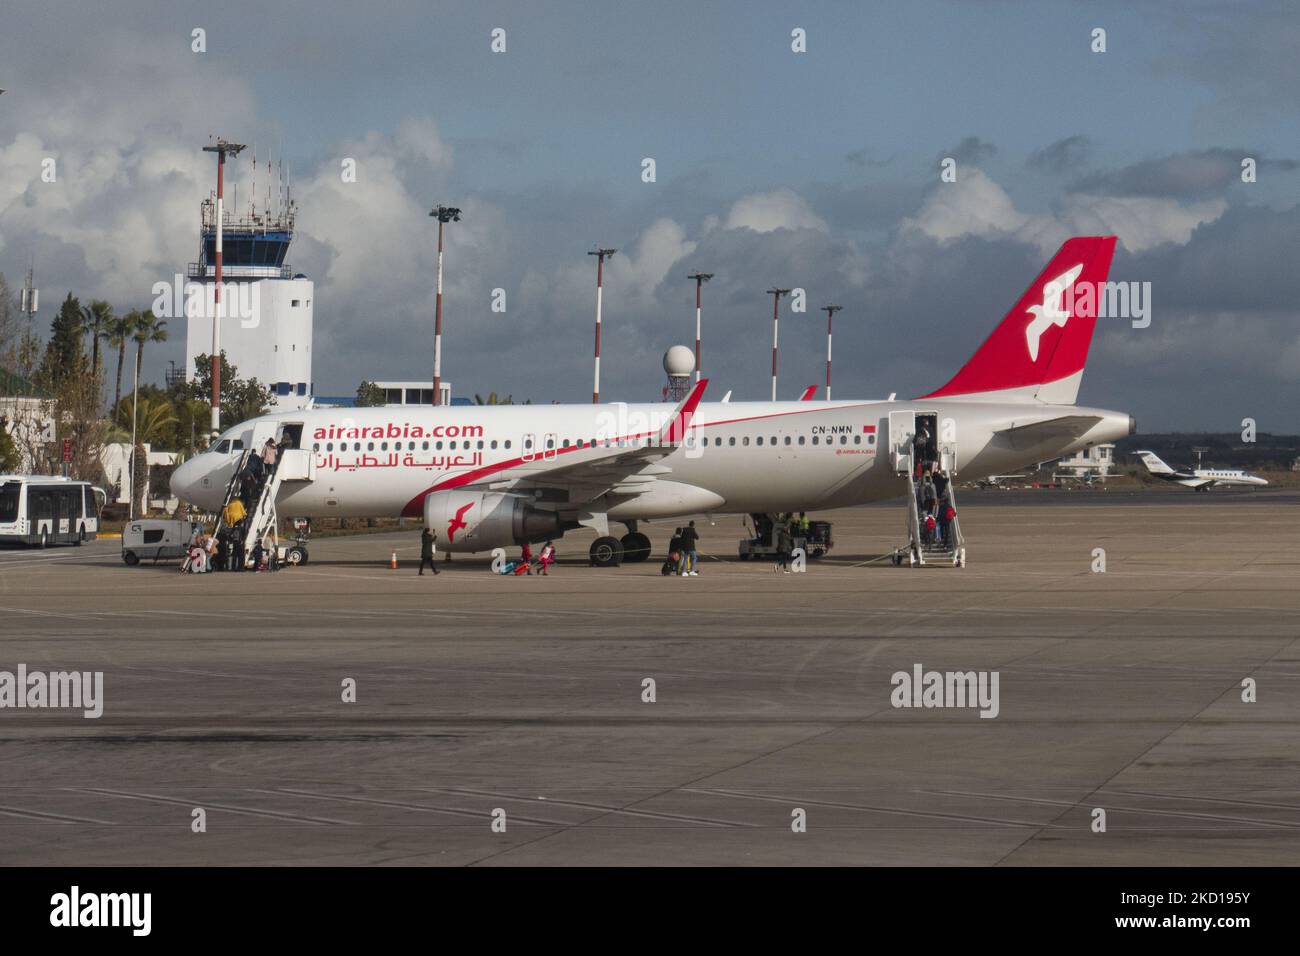 Air Arabia Maroc Airbus A320 aircraft as seen at Fes - Sais Airport near the city of Fez while passenger are seen boarding the plane. The Airbus jet airplane has the registration CN-NMN. Air Arabia Maroc is a Moroccan low cost airline subsidiary of AirArabia. Fes, Morocco on January 19, 2020 (Photo by Nicolas Economou/NurPhoto) Stock Photo